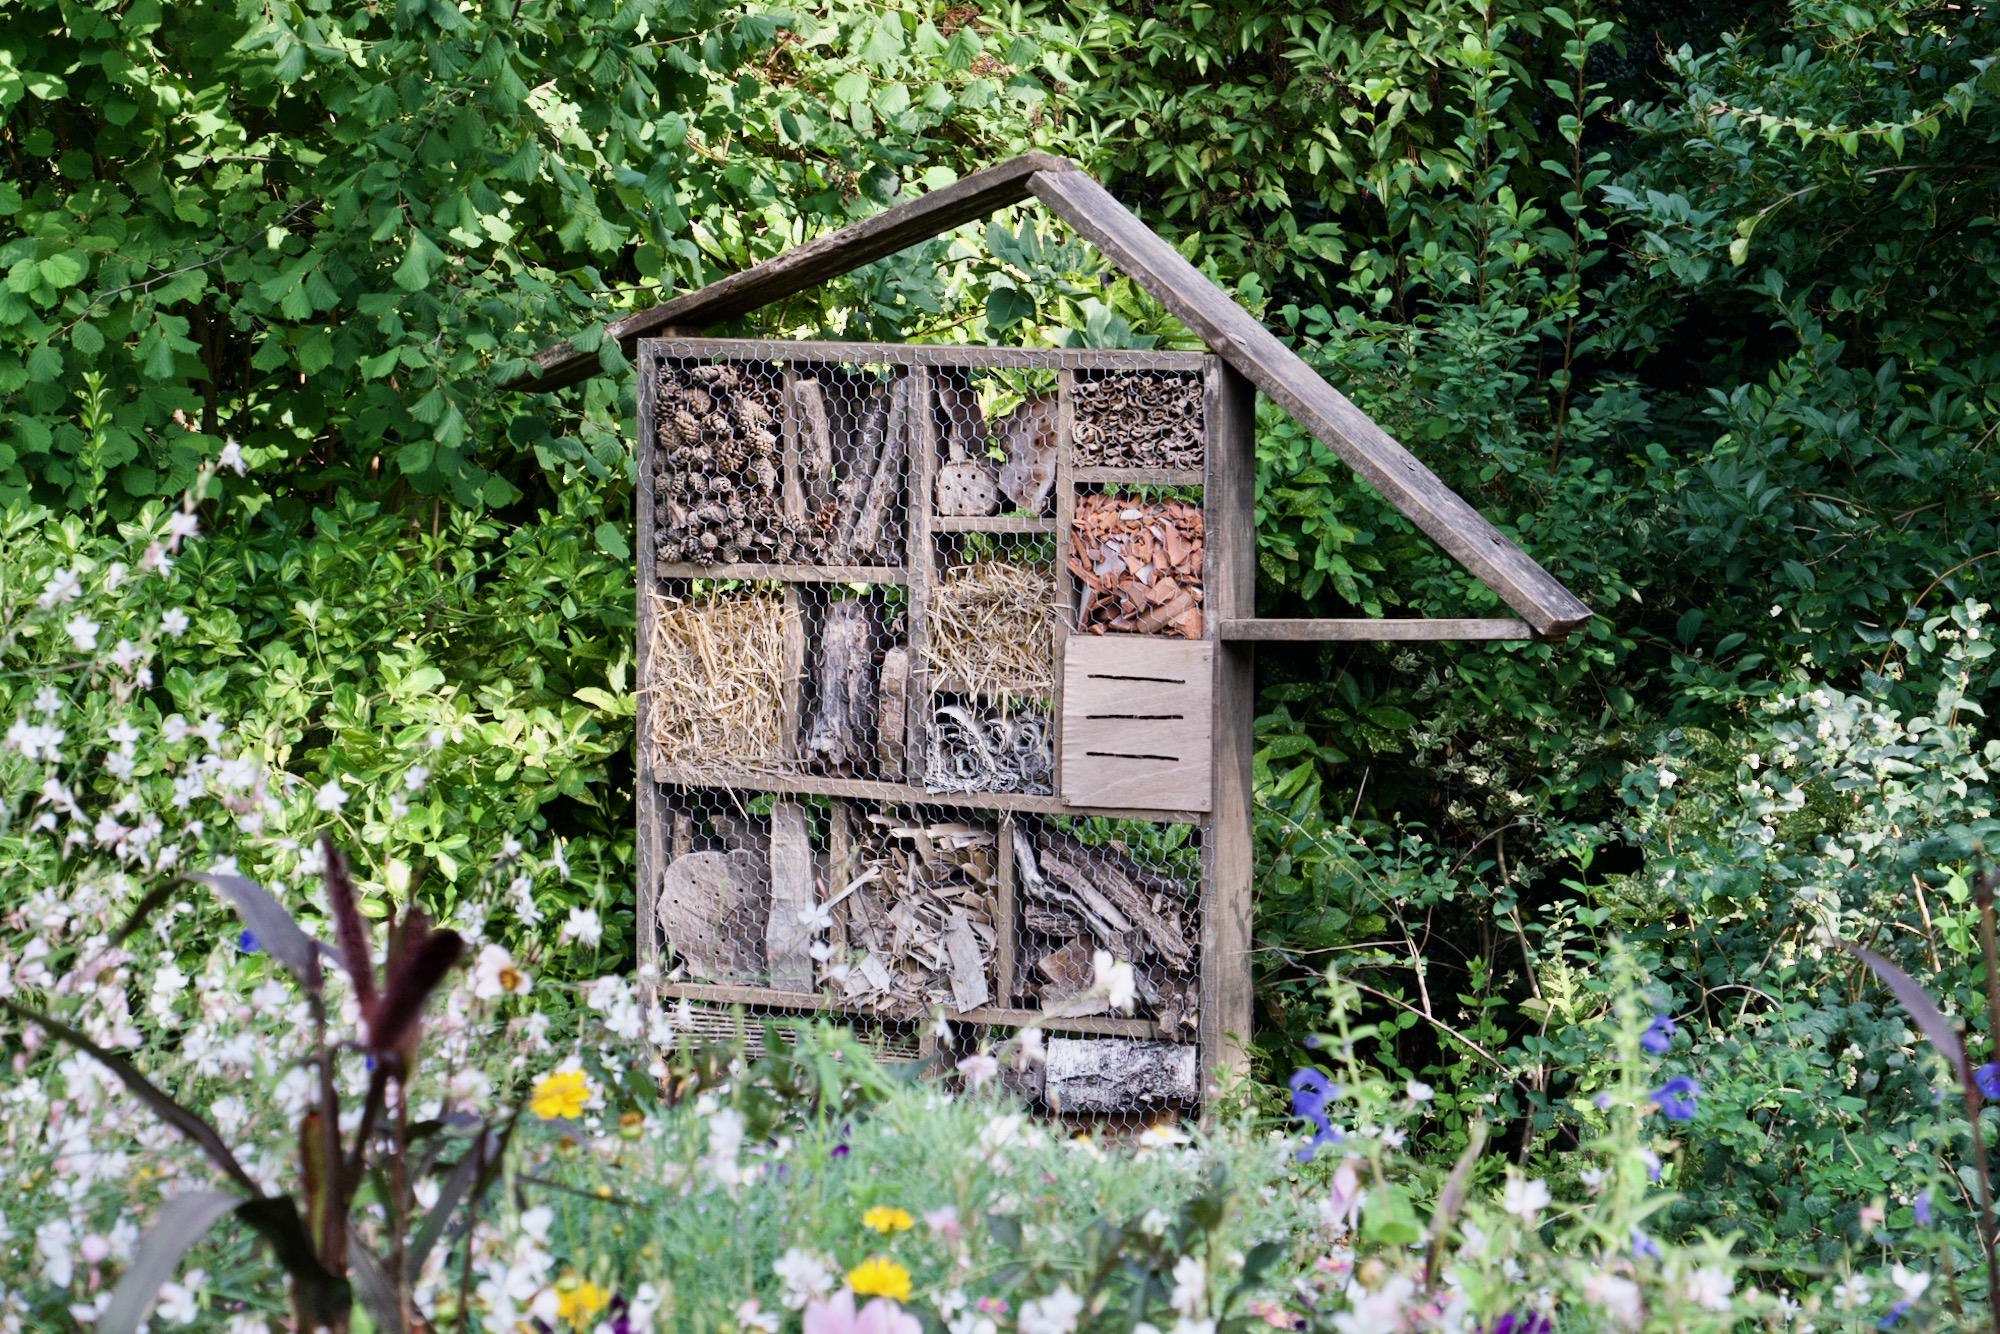 A homemade insect house